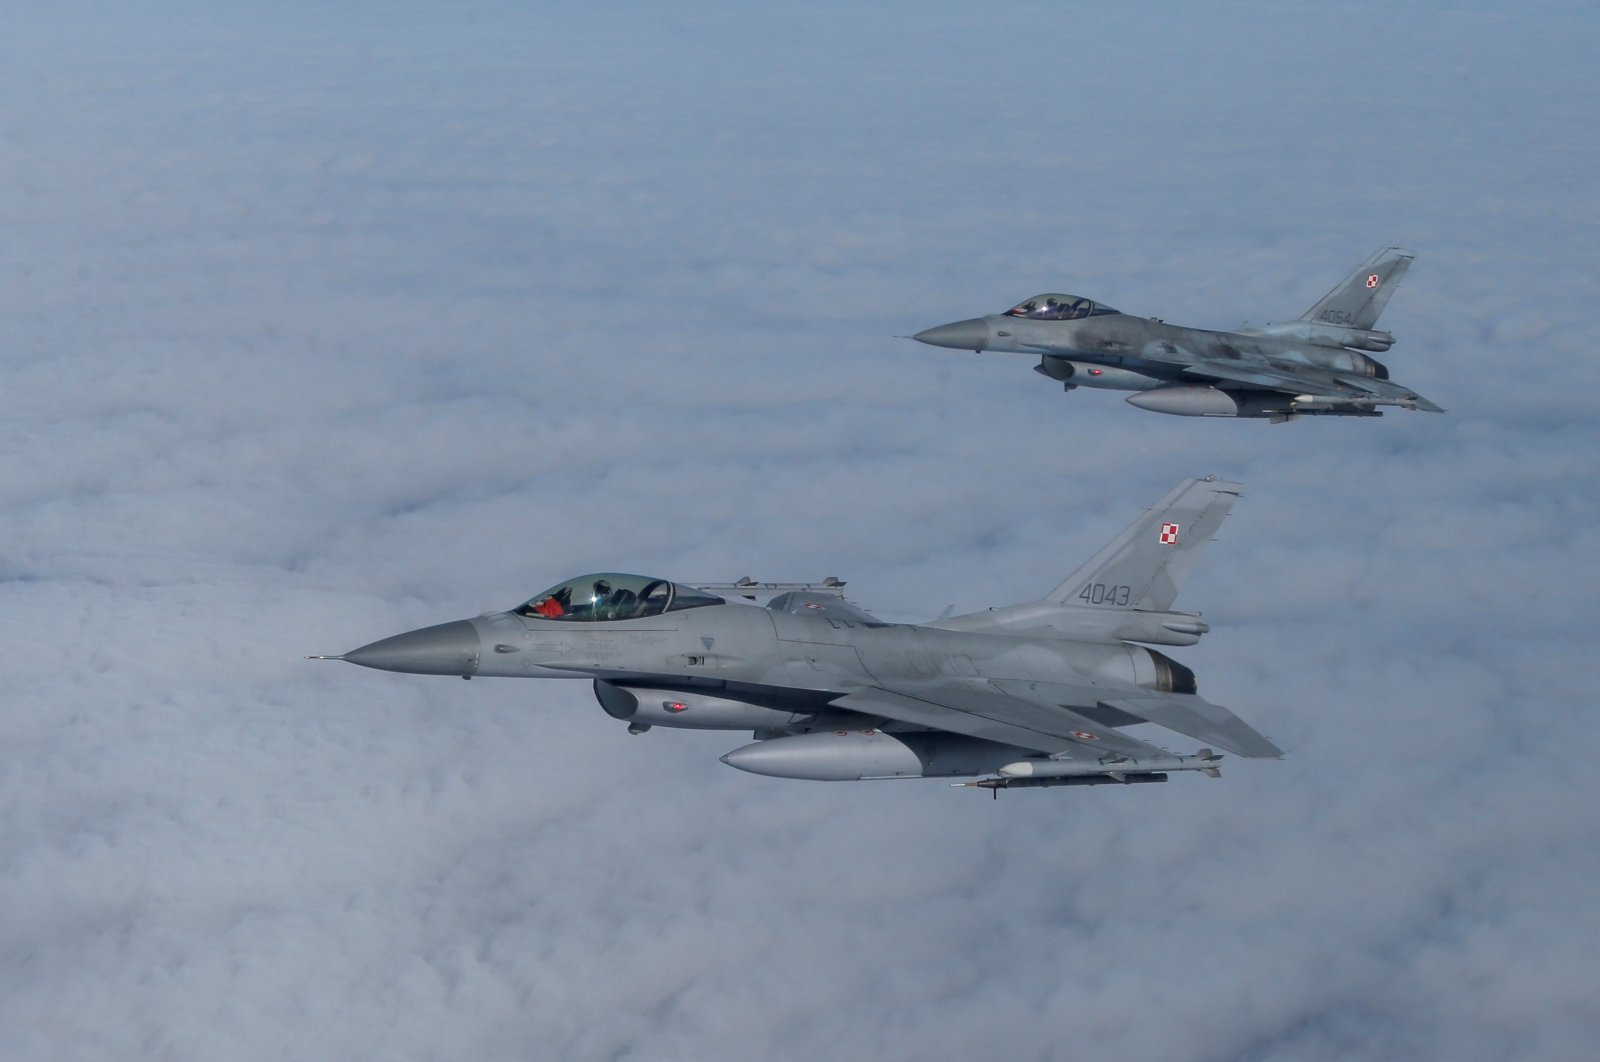 F-16 aircraft fly during a NATO media event at an airbase in Malbork, Poland, March 21, 2023. (Reuters Photo)